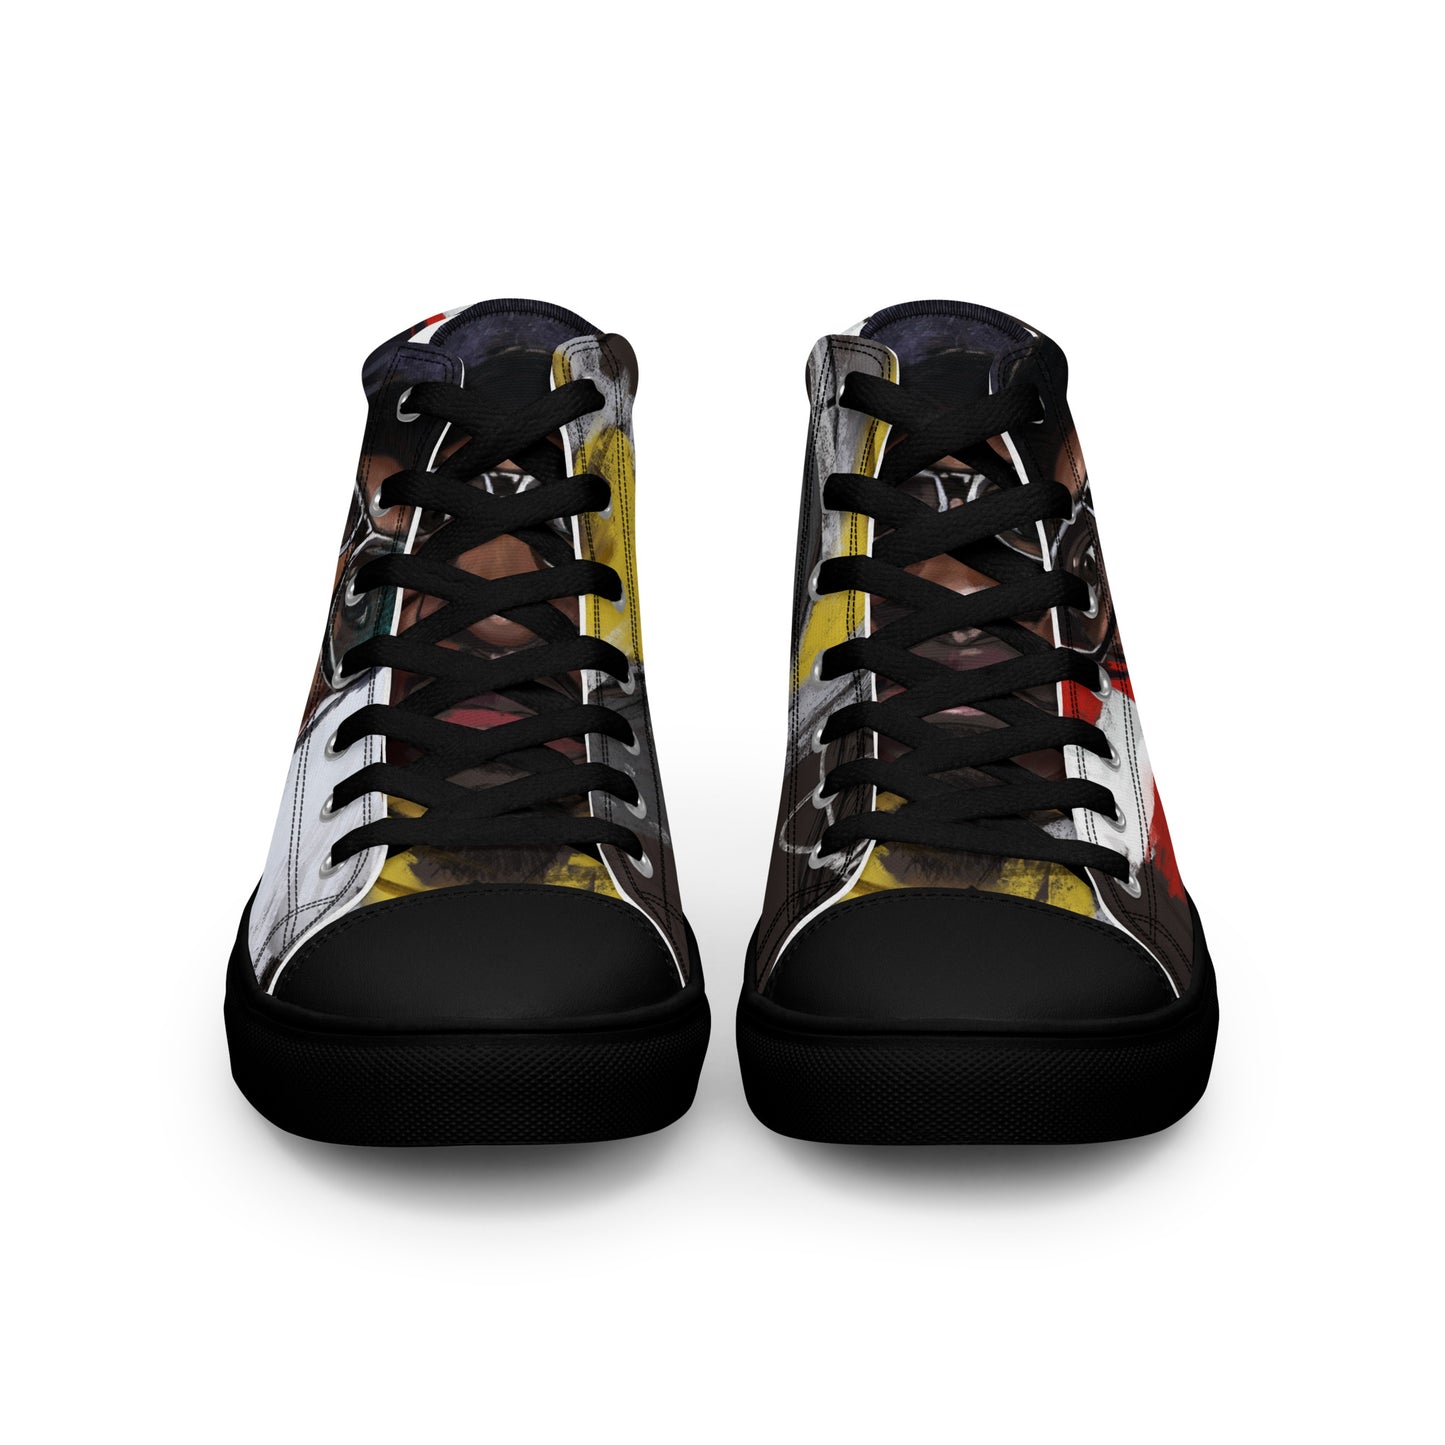 3 Stacks Men’s high top canvas shoes